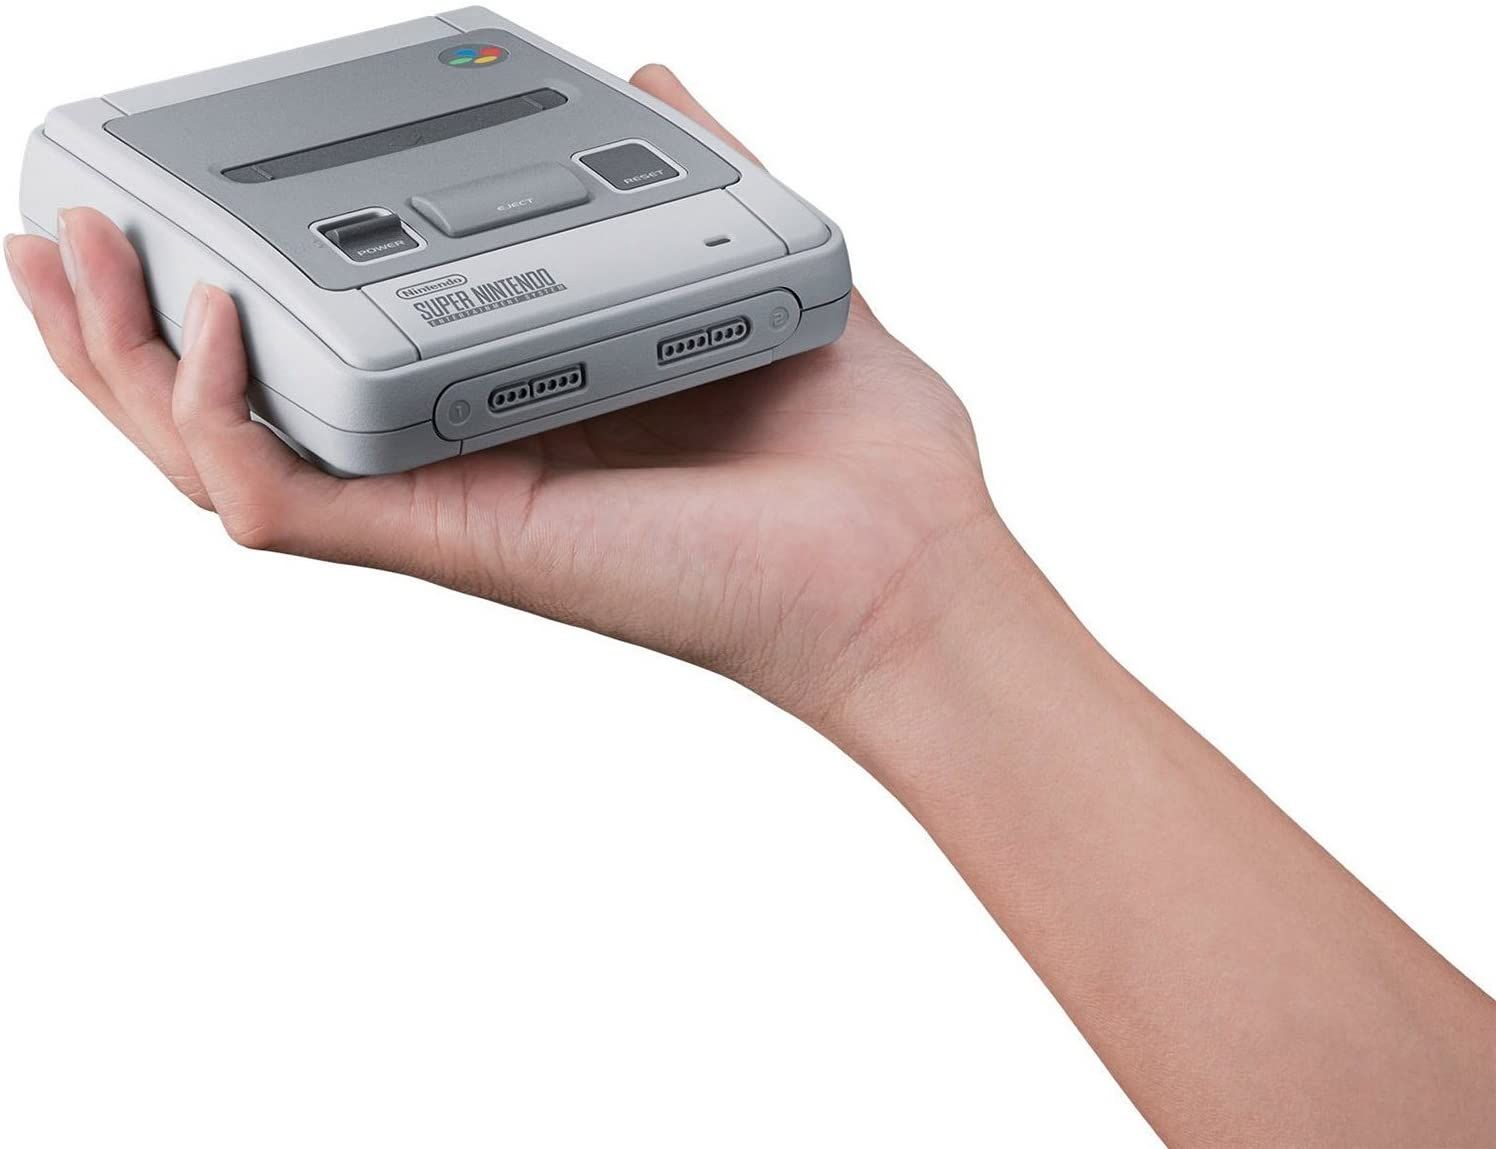 Super NES Classic being held upright